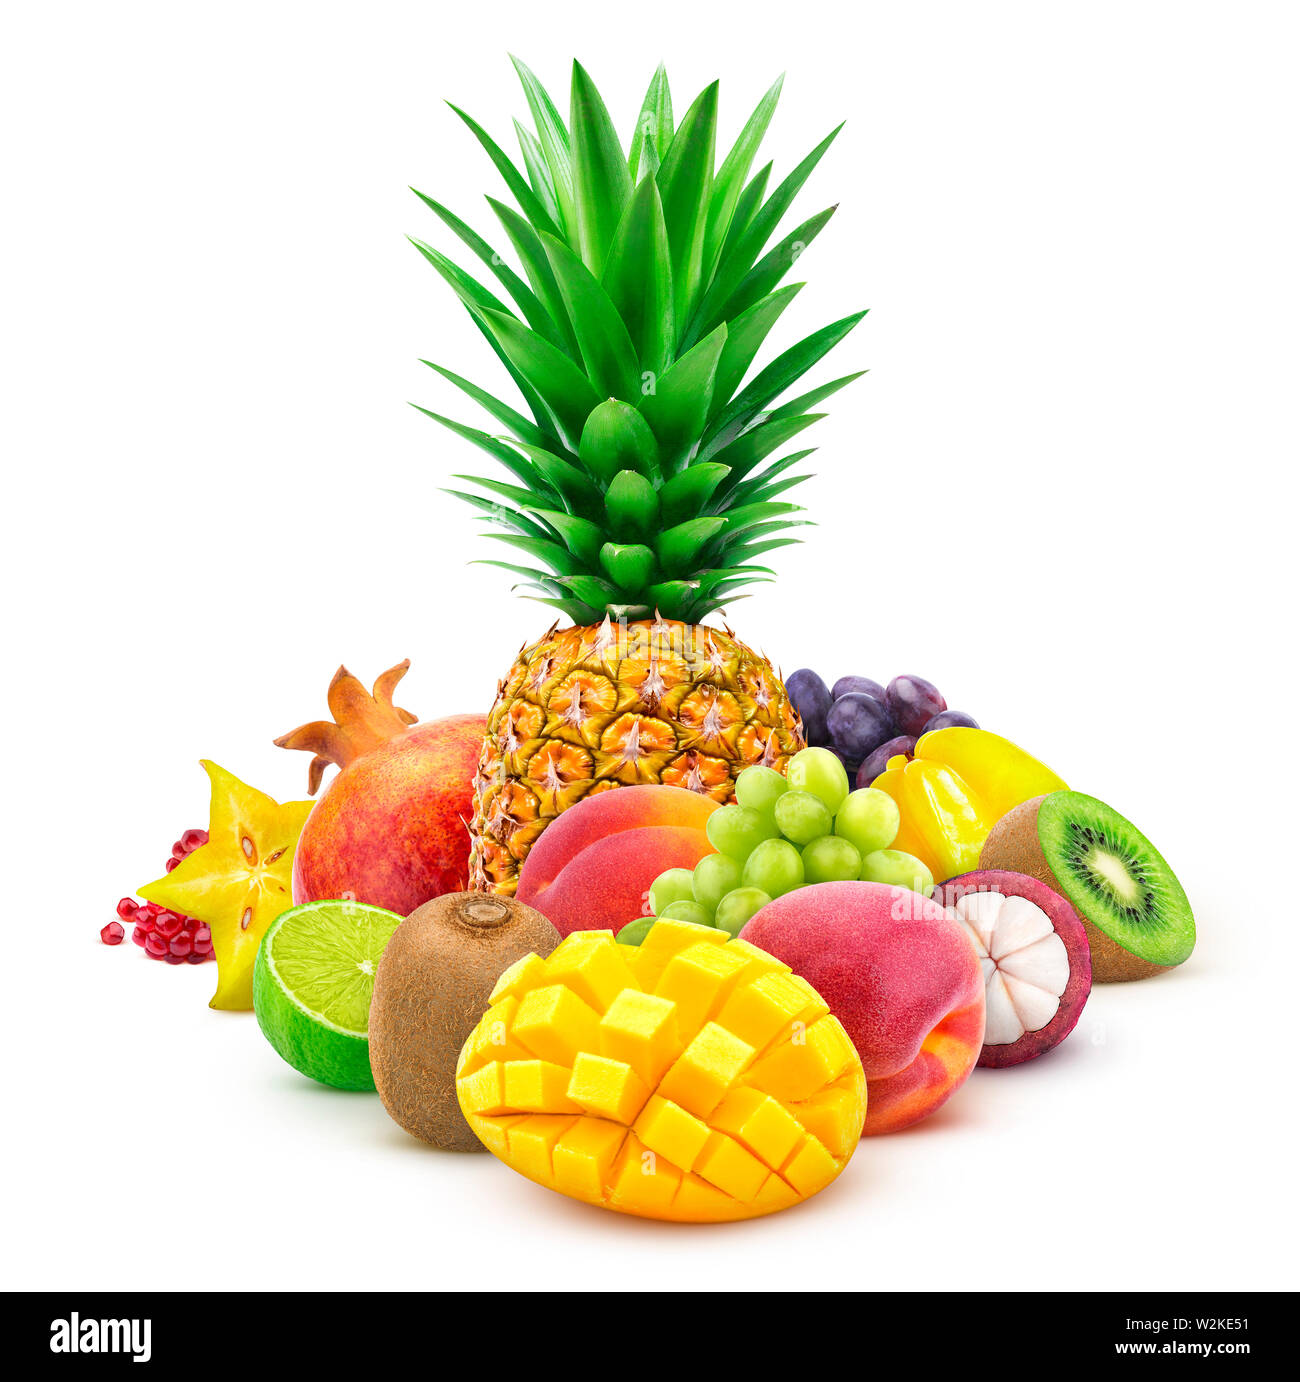 Tropical fruits whole and cut isolated on white background Stock Photo